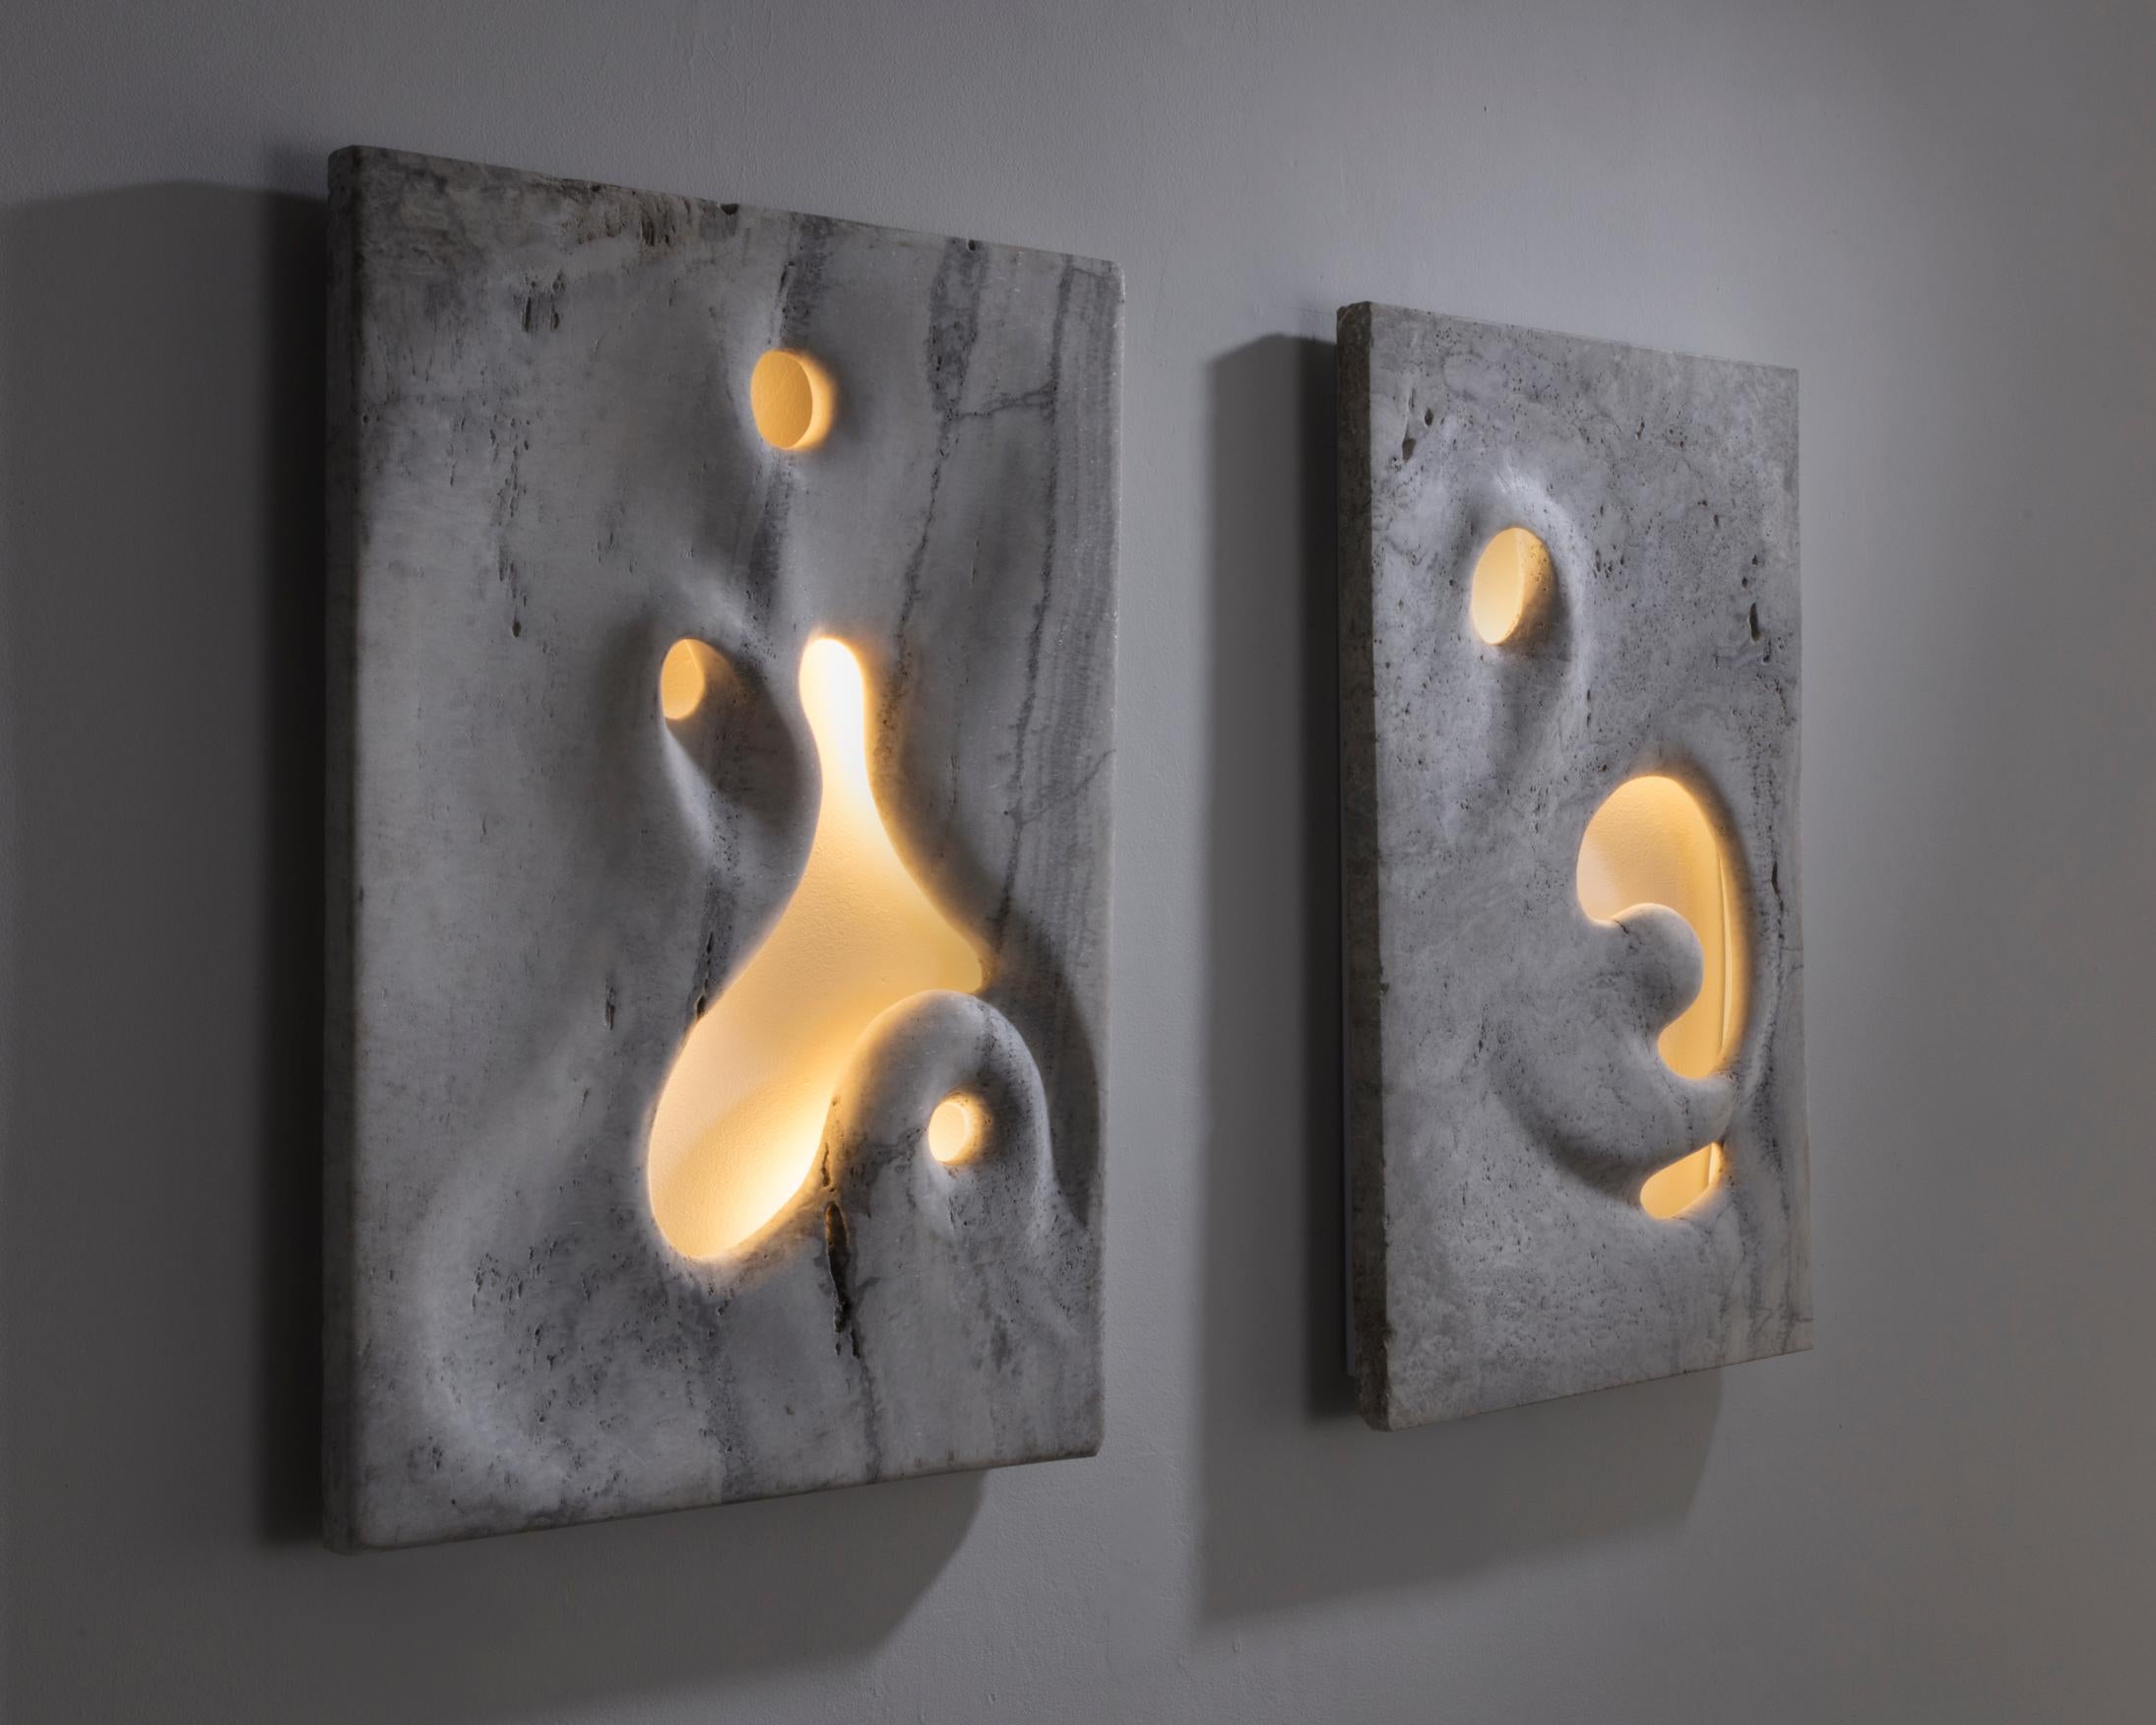 Contemporary Wall Mounted Illuminated Sculpture in White Travertine by Rogan Gregory, 2016